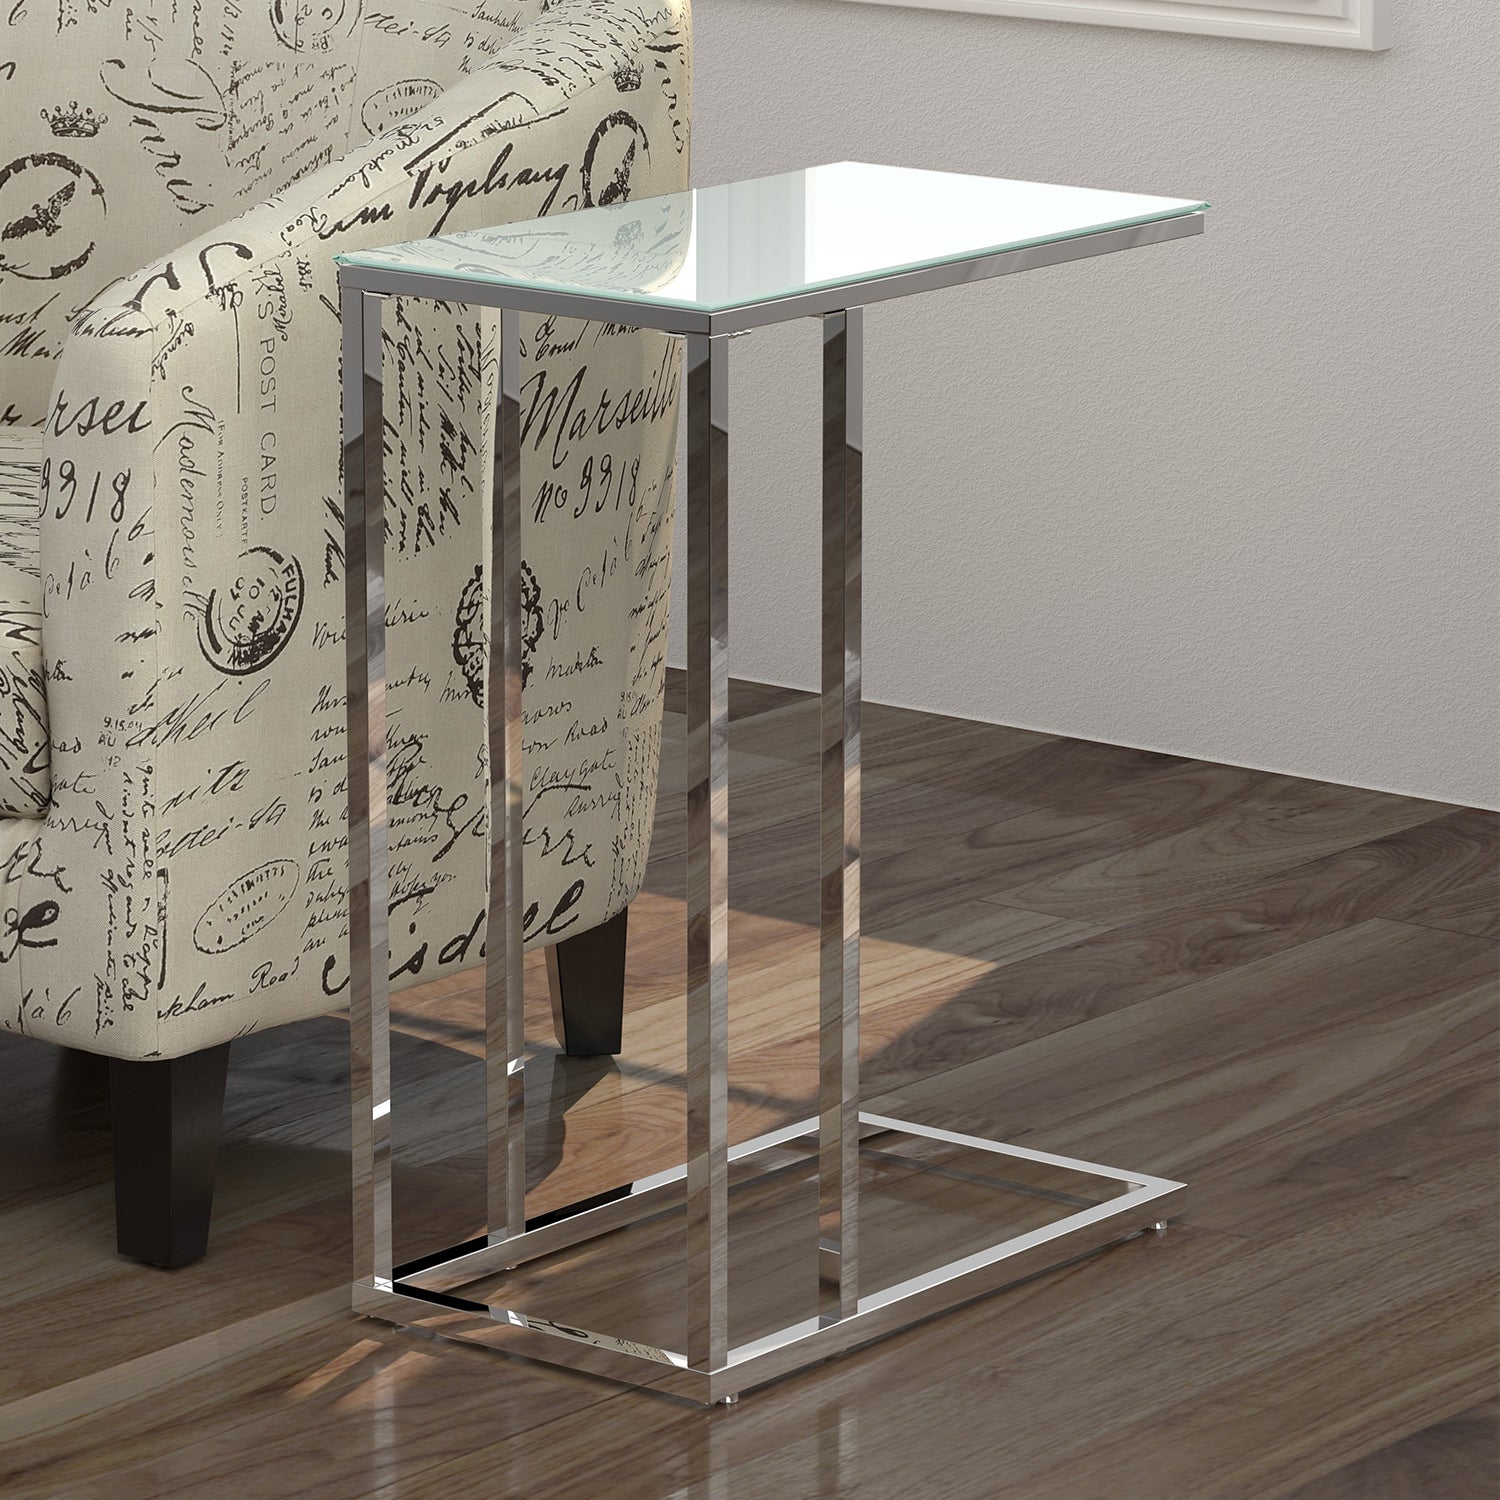 18" X 12" X 24" Cappuccino Brown Mdf Metal  Accent Table